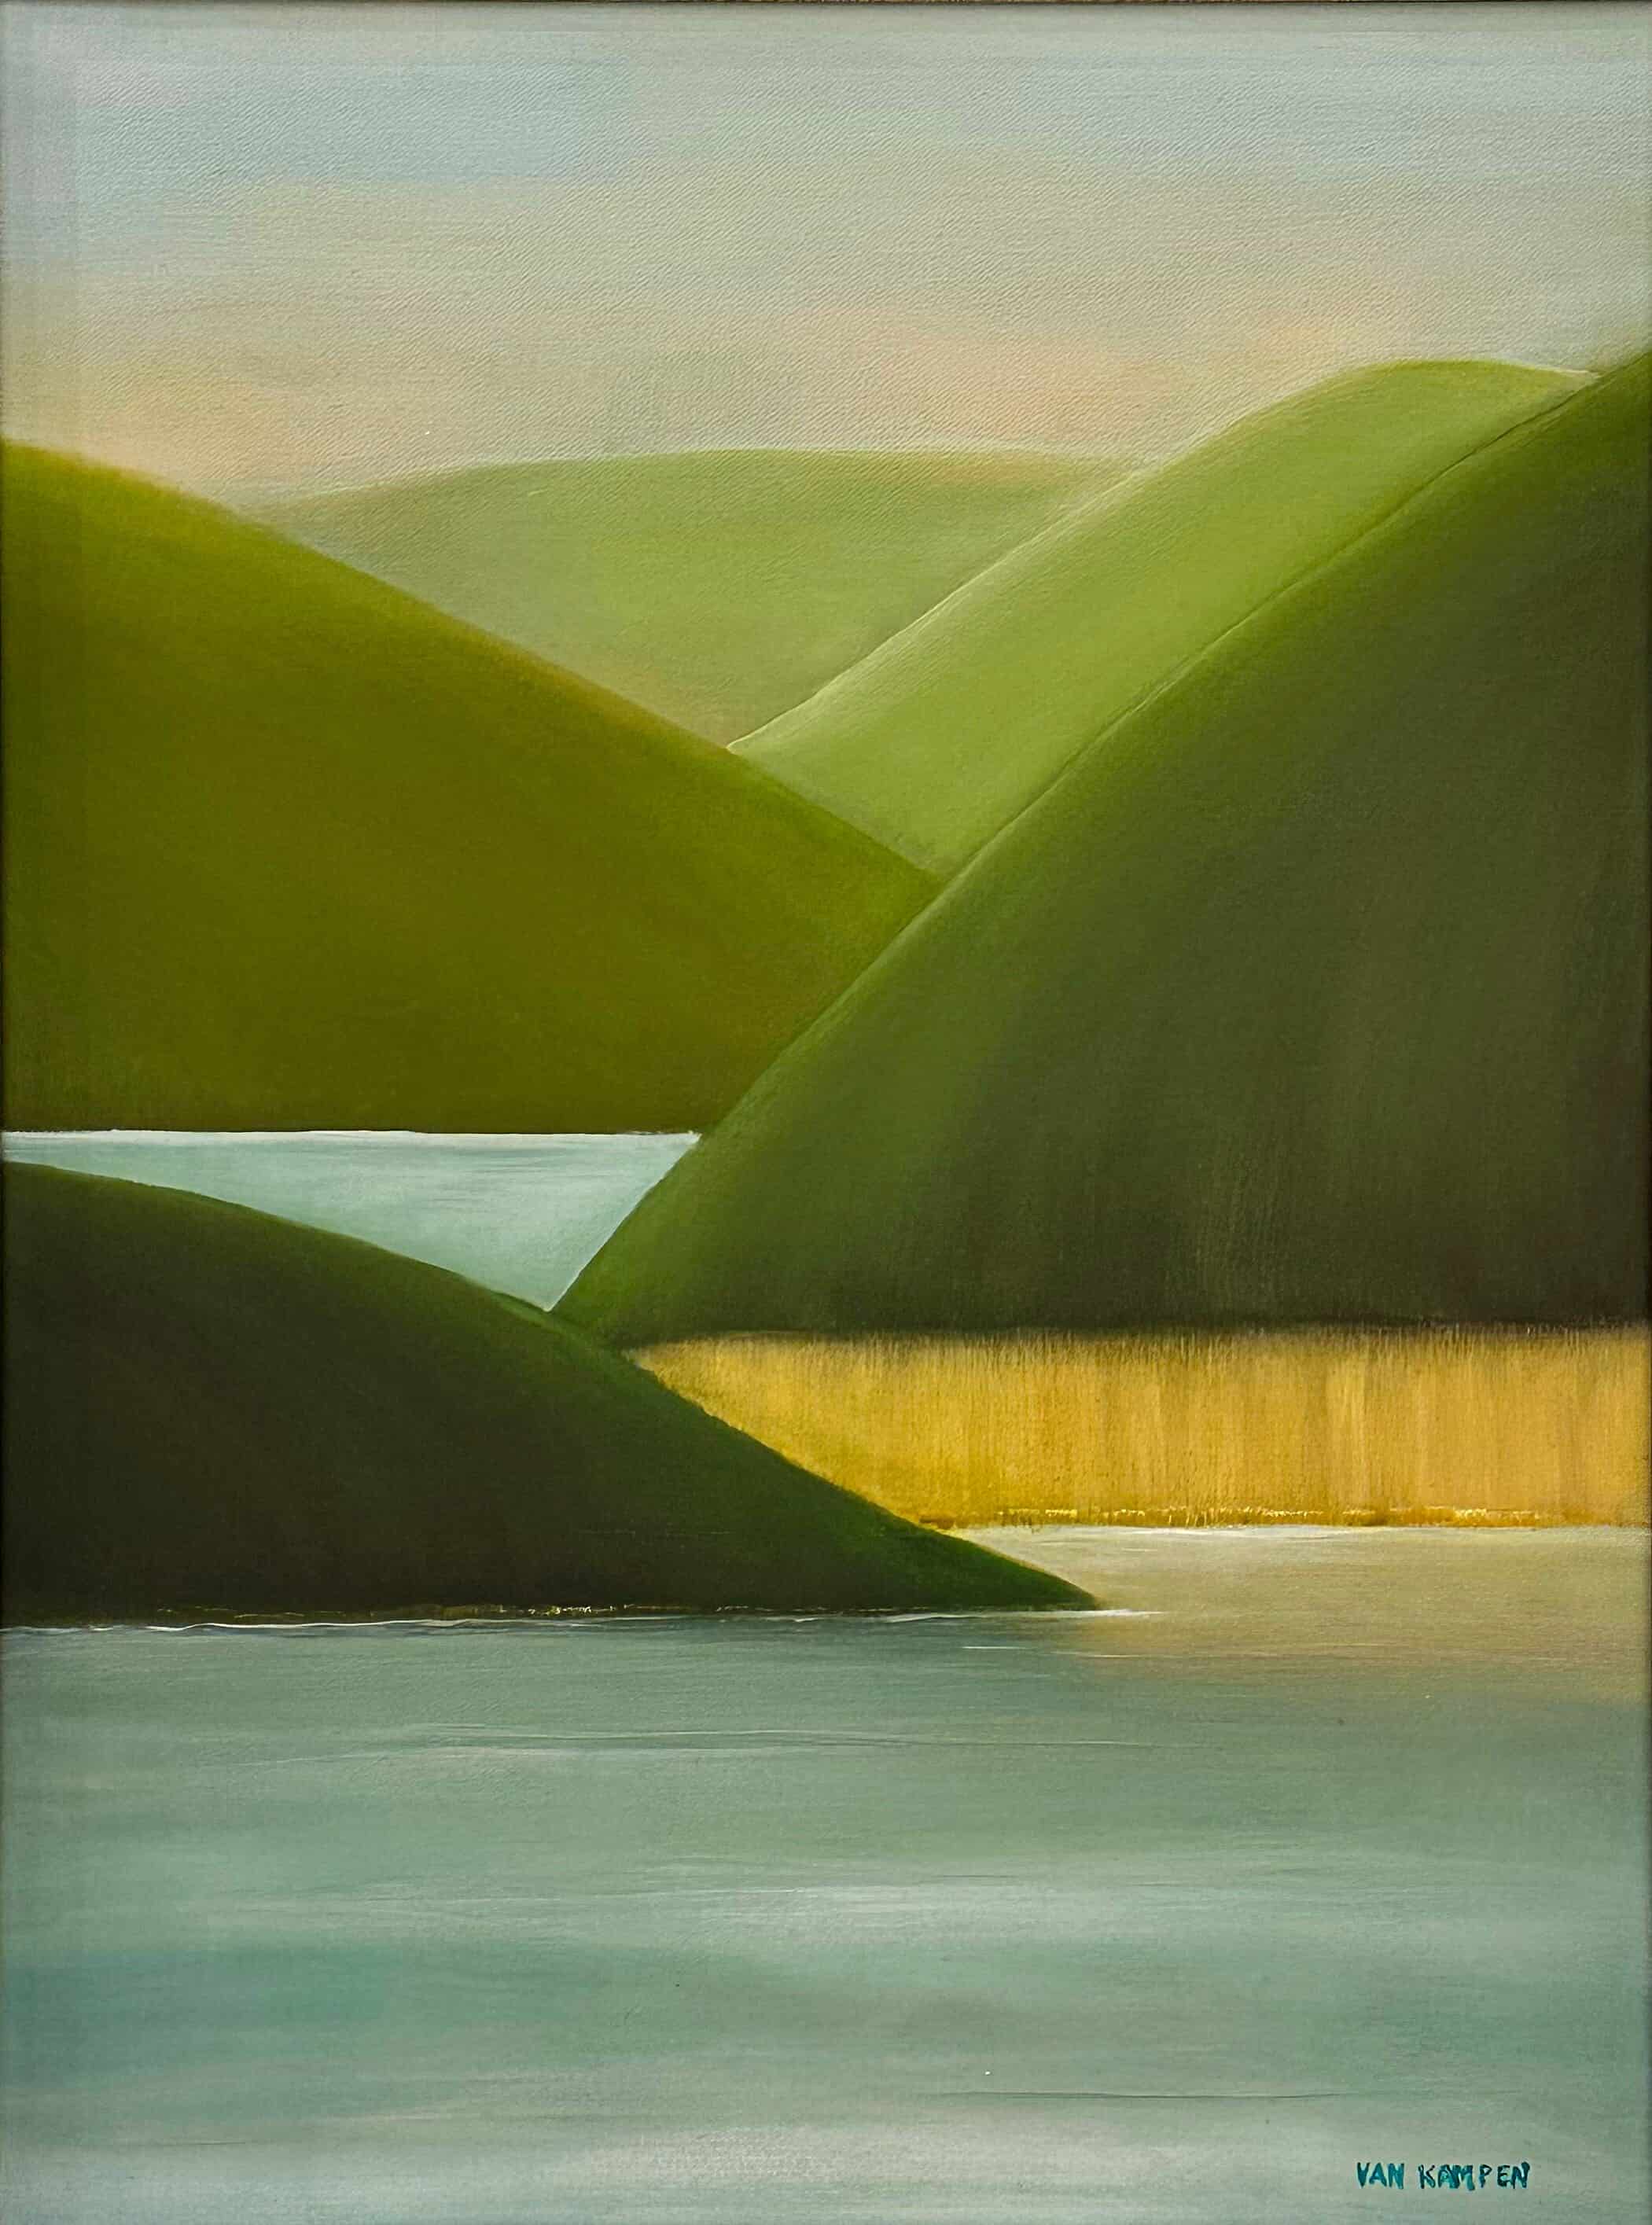 Contemporary Art. Title: Symphony of Serenity, Oil on Canvas, 24 x 18 in by Canadian artist Katherine van Kampen.